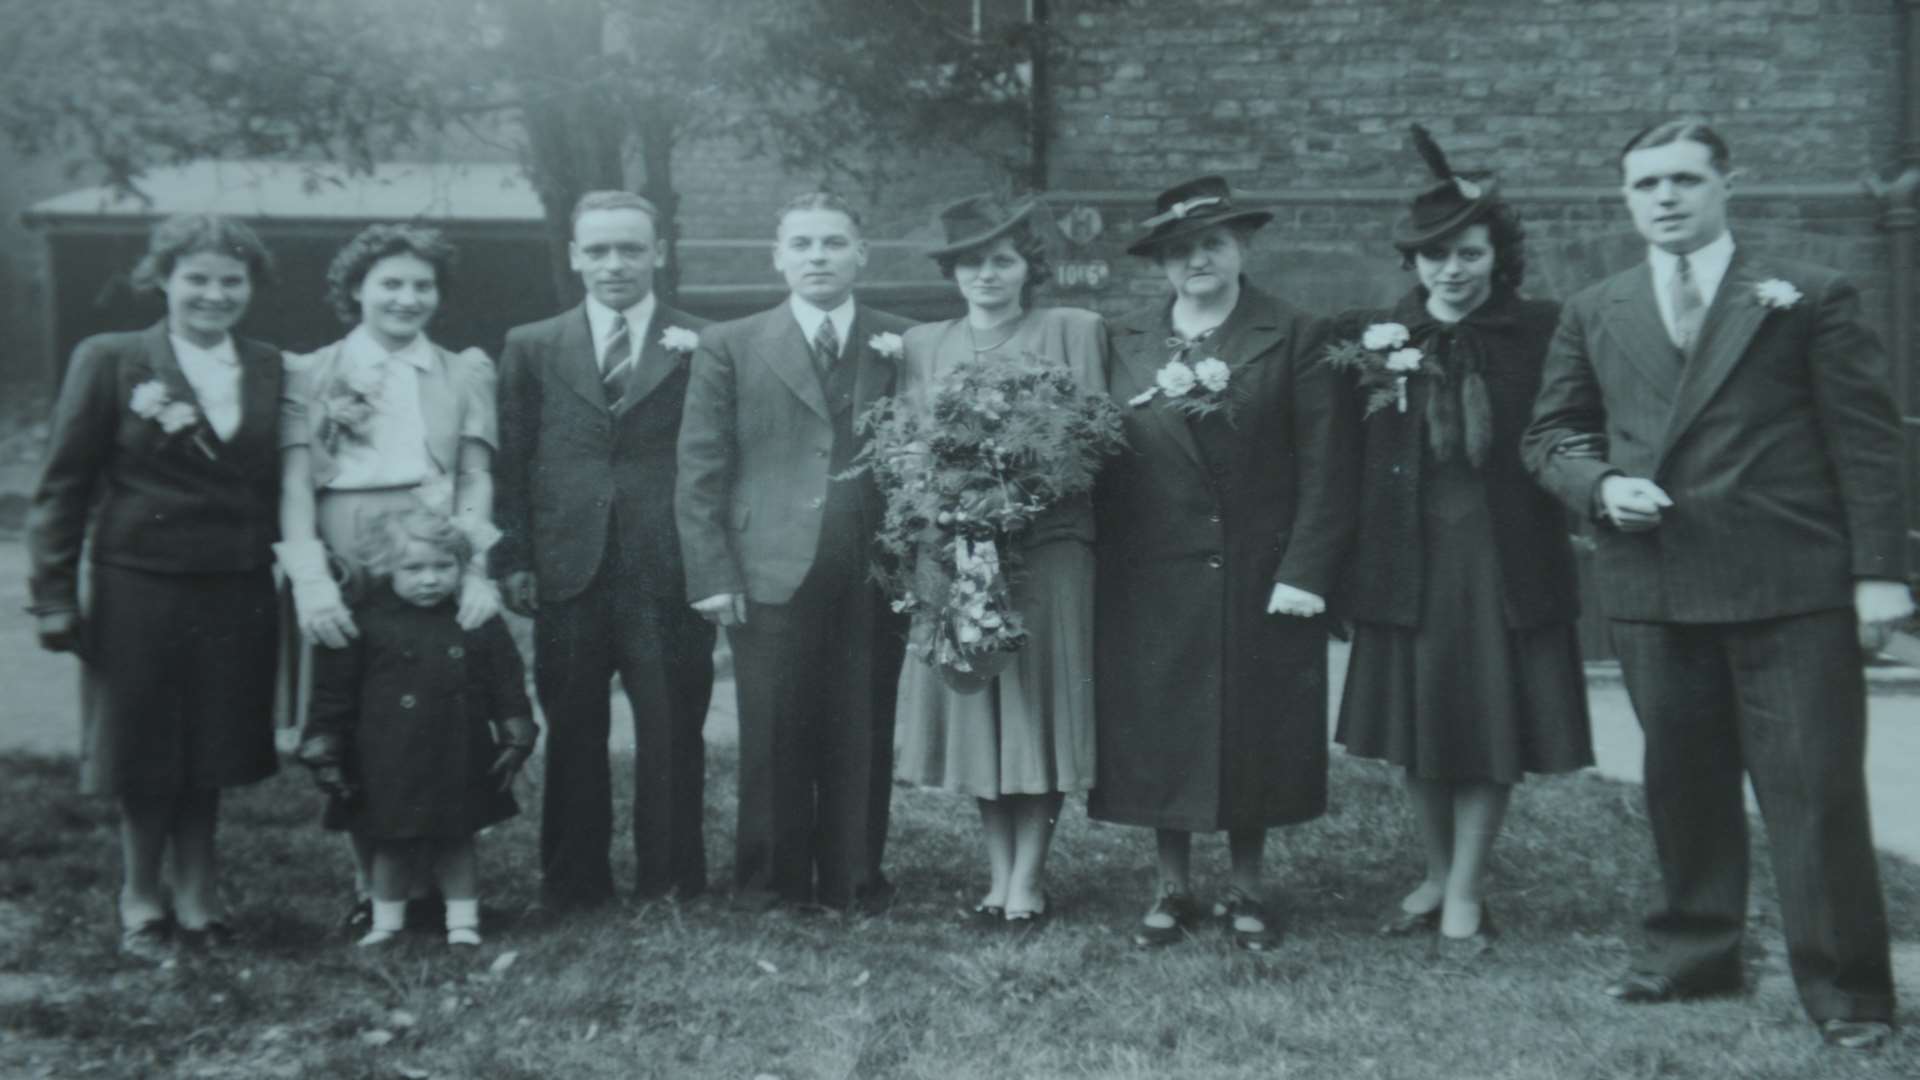 Violet marries William on March 20 1943